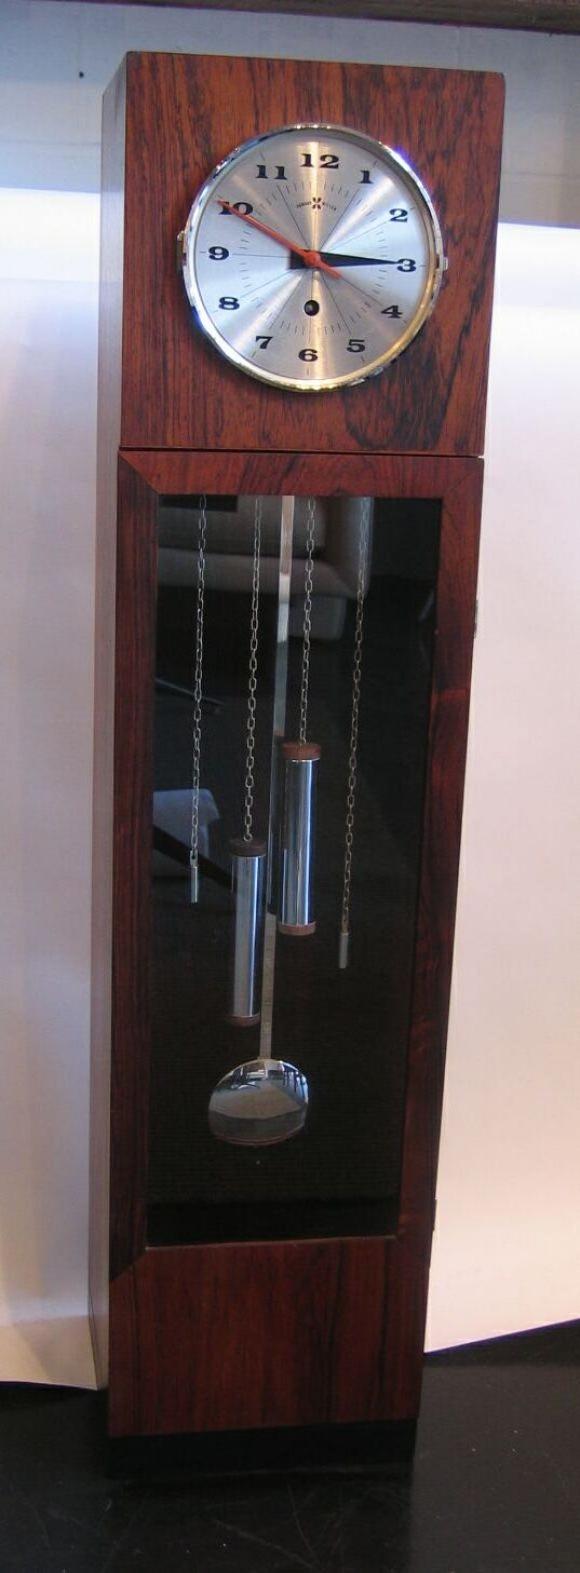 Beautiful half-height tabletop grandfather clock in rosewood. Designed by George Nelson for Howard Miller clock company. Wind-up mechanism. Weights and pendulum are purely decorative.